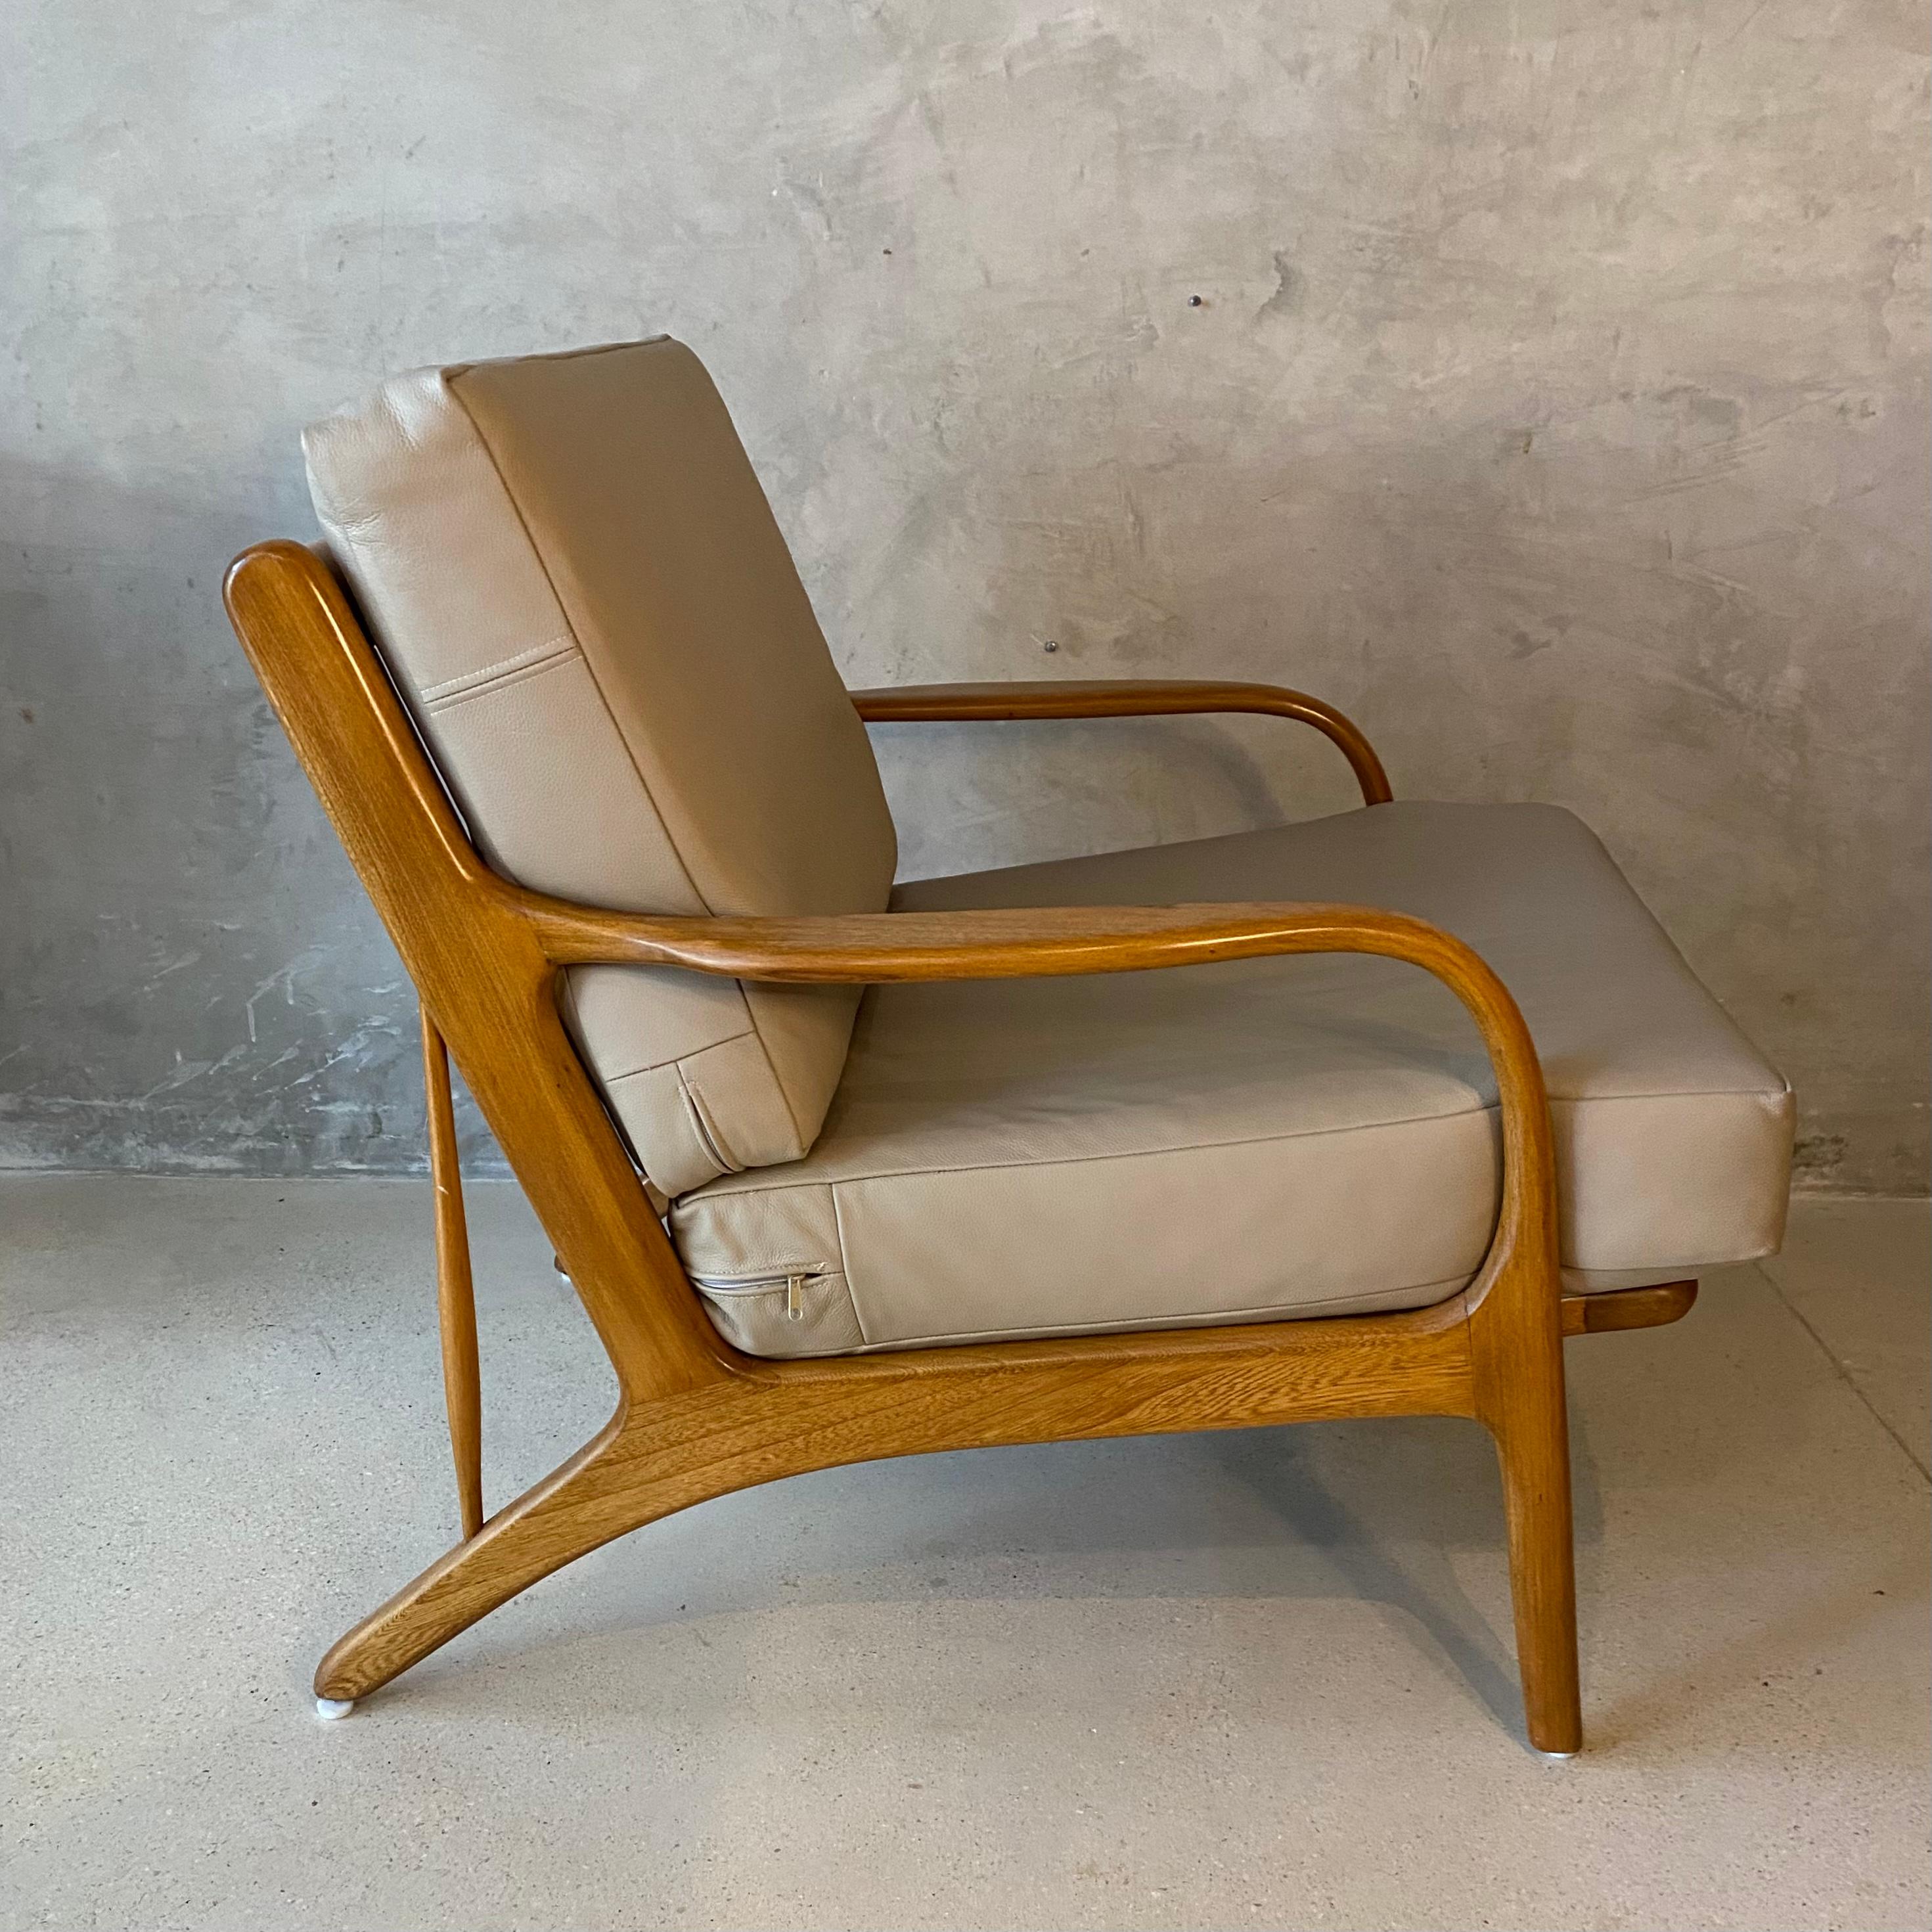 Mexican Midcentury Lounge Chair, “Malinche“, 1950s For Sale 5